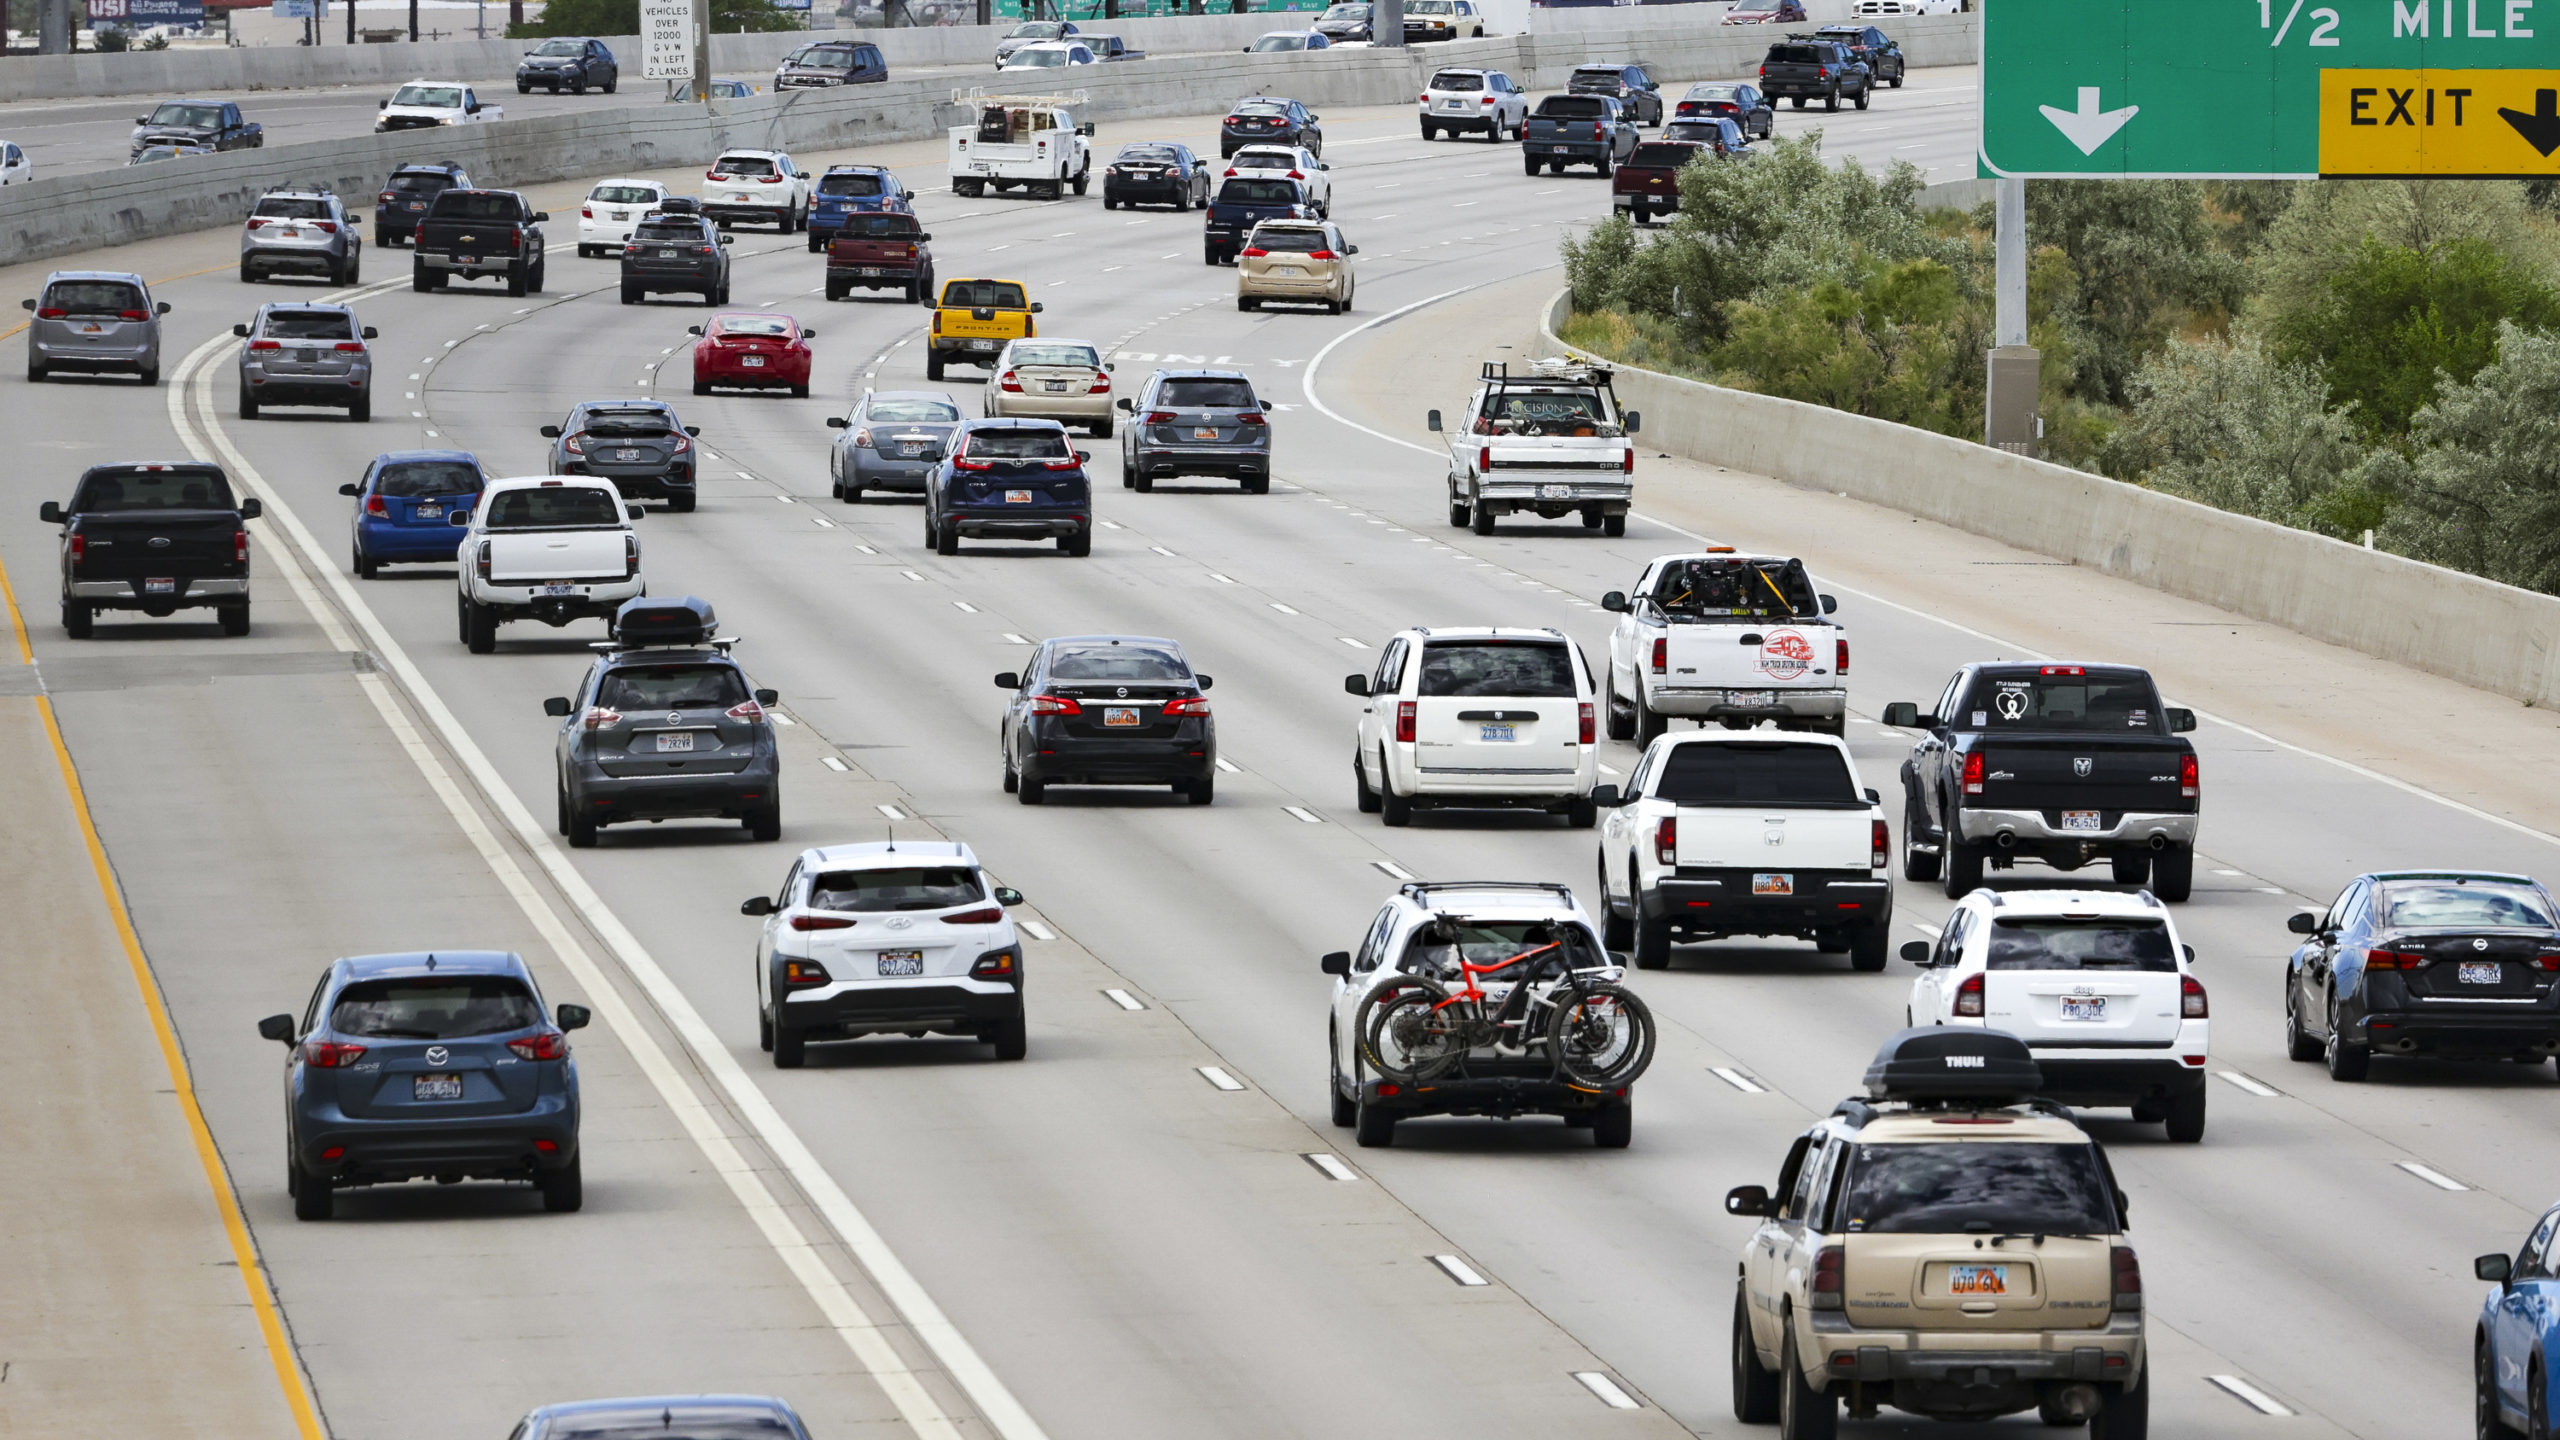 Traffic moves alone an interstate. Transportation costs eat up Utahn's paycheck according to new da...